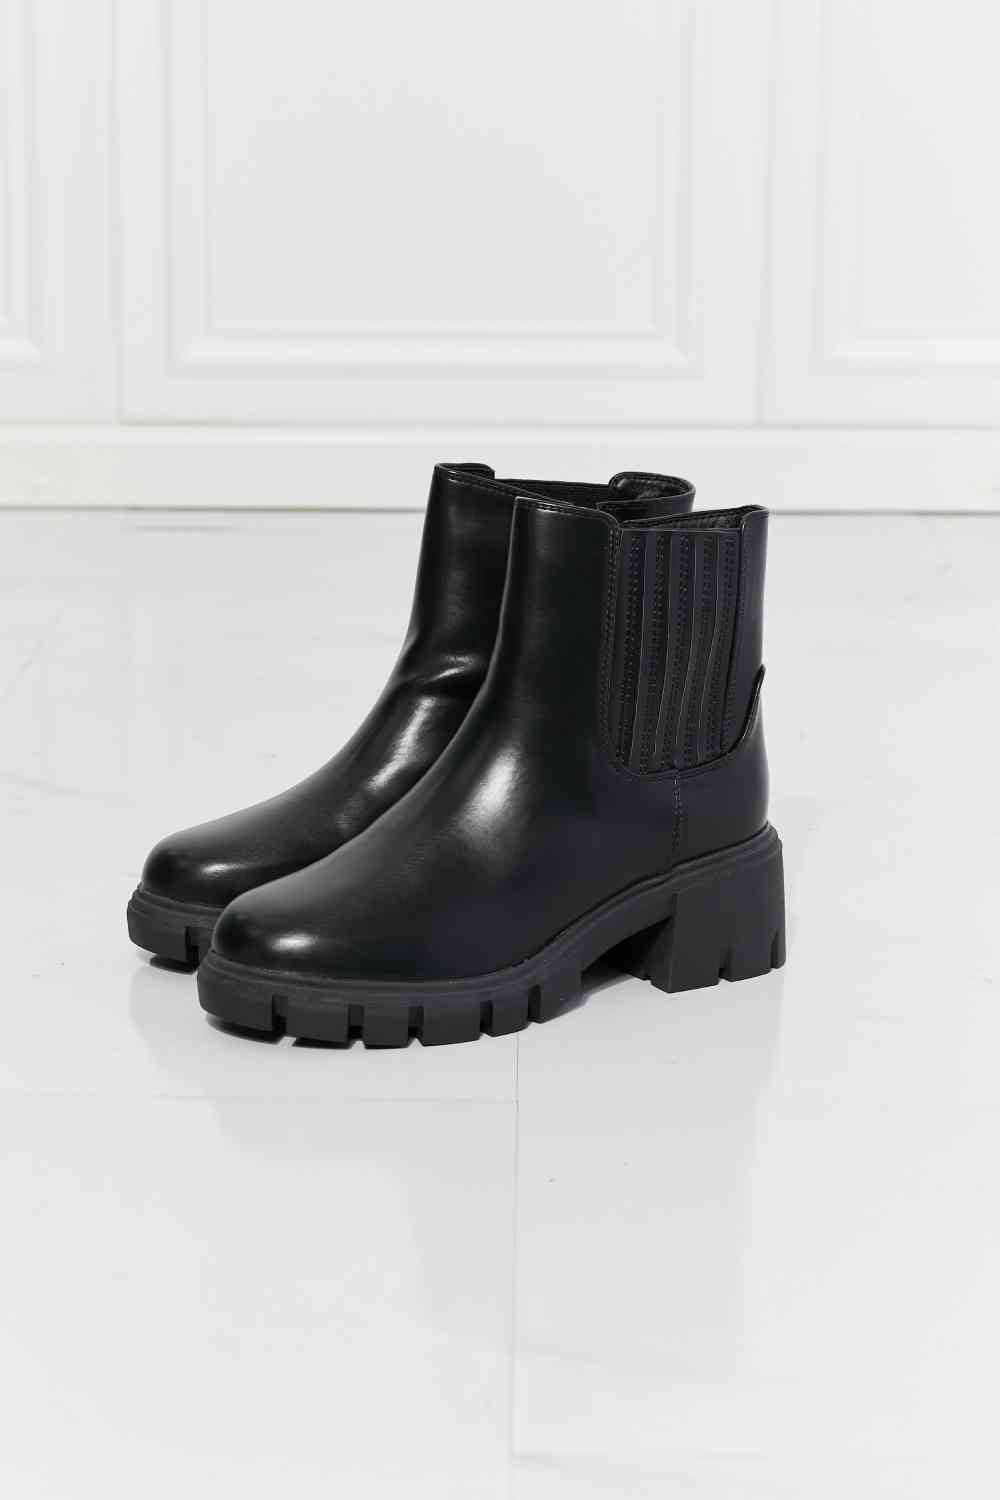 MMShoes What It Takes Lug Sole Chelsea Boots in Black  Hot Trends